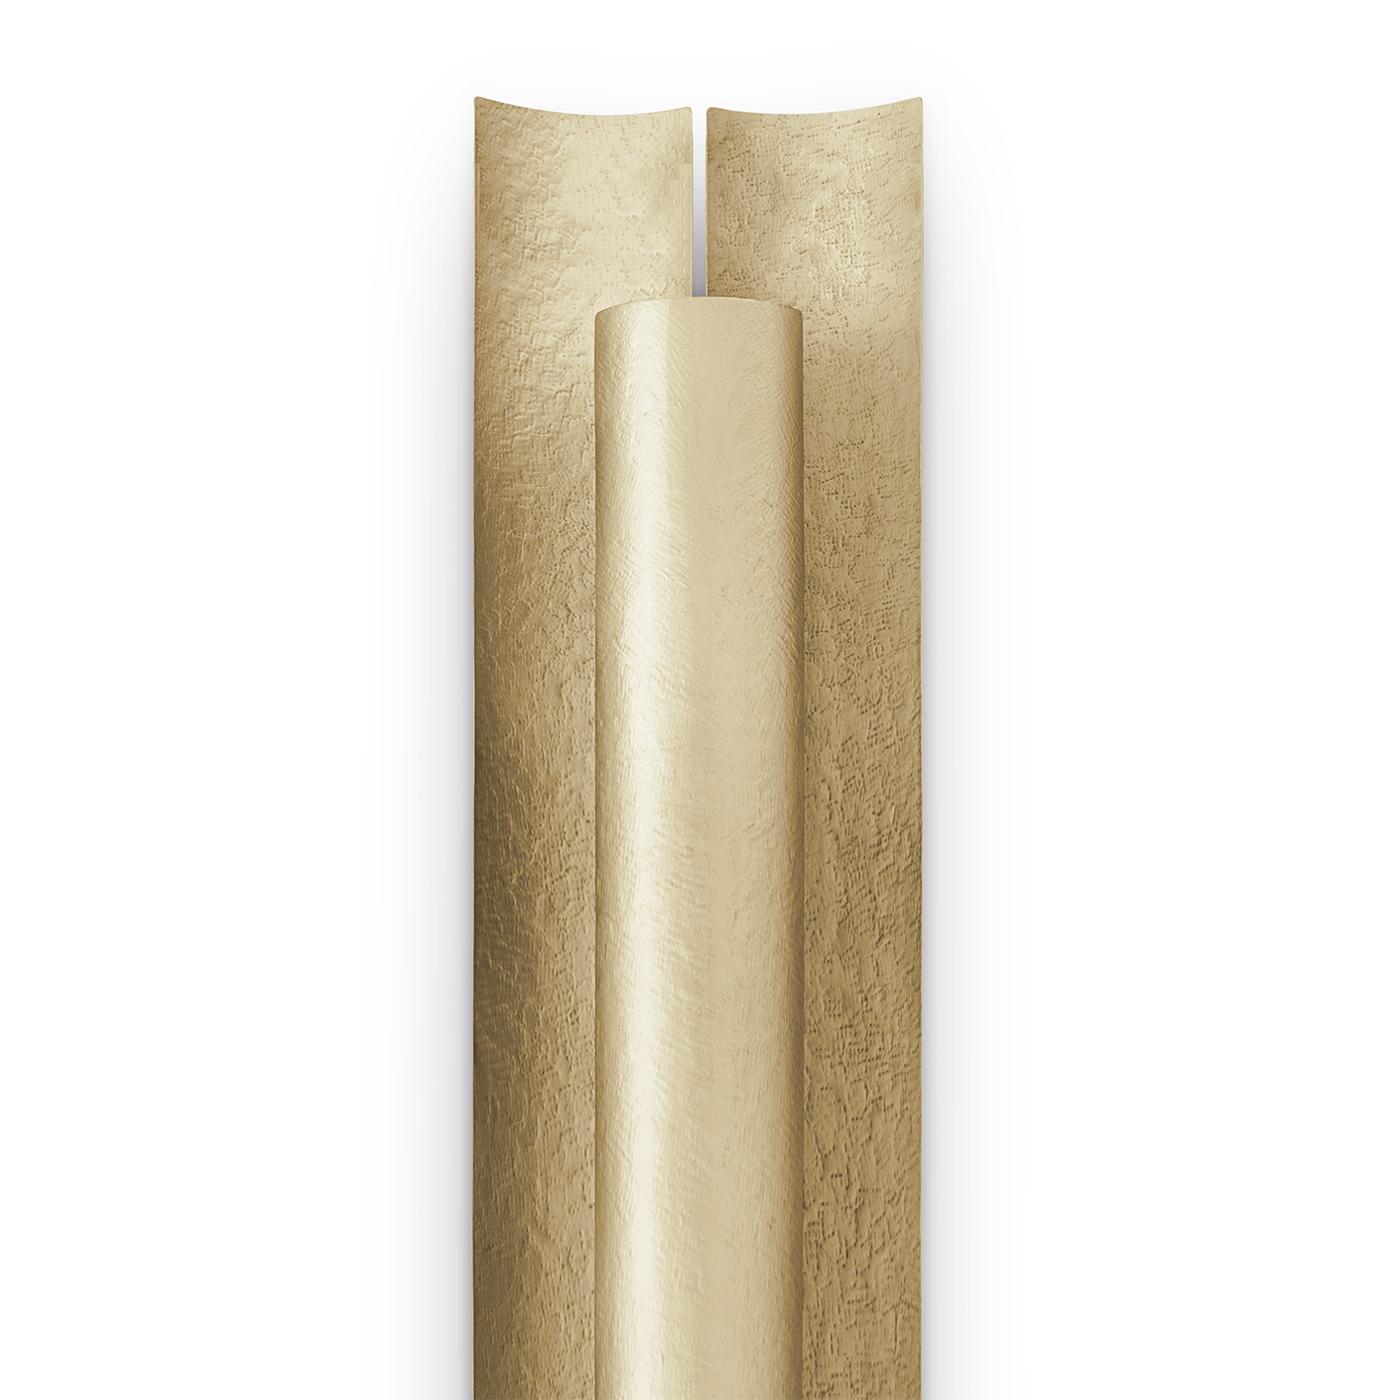 Wall lamp atom high with all structure in 
solid brass in matt and hammered finish.